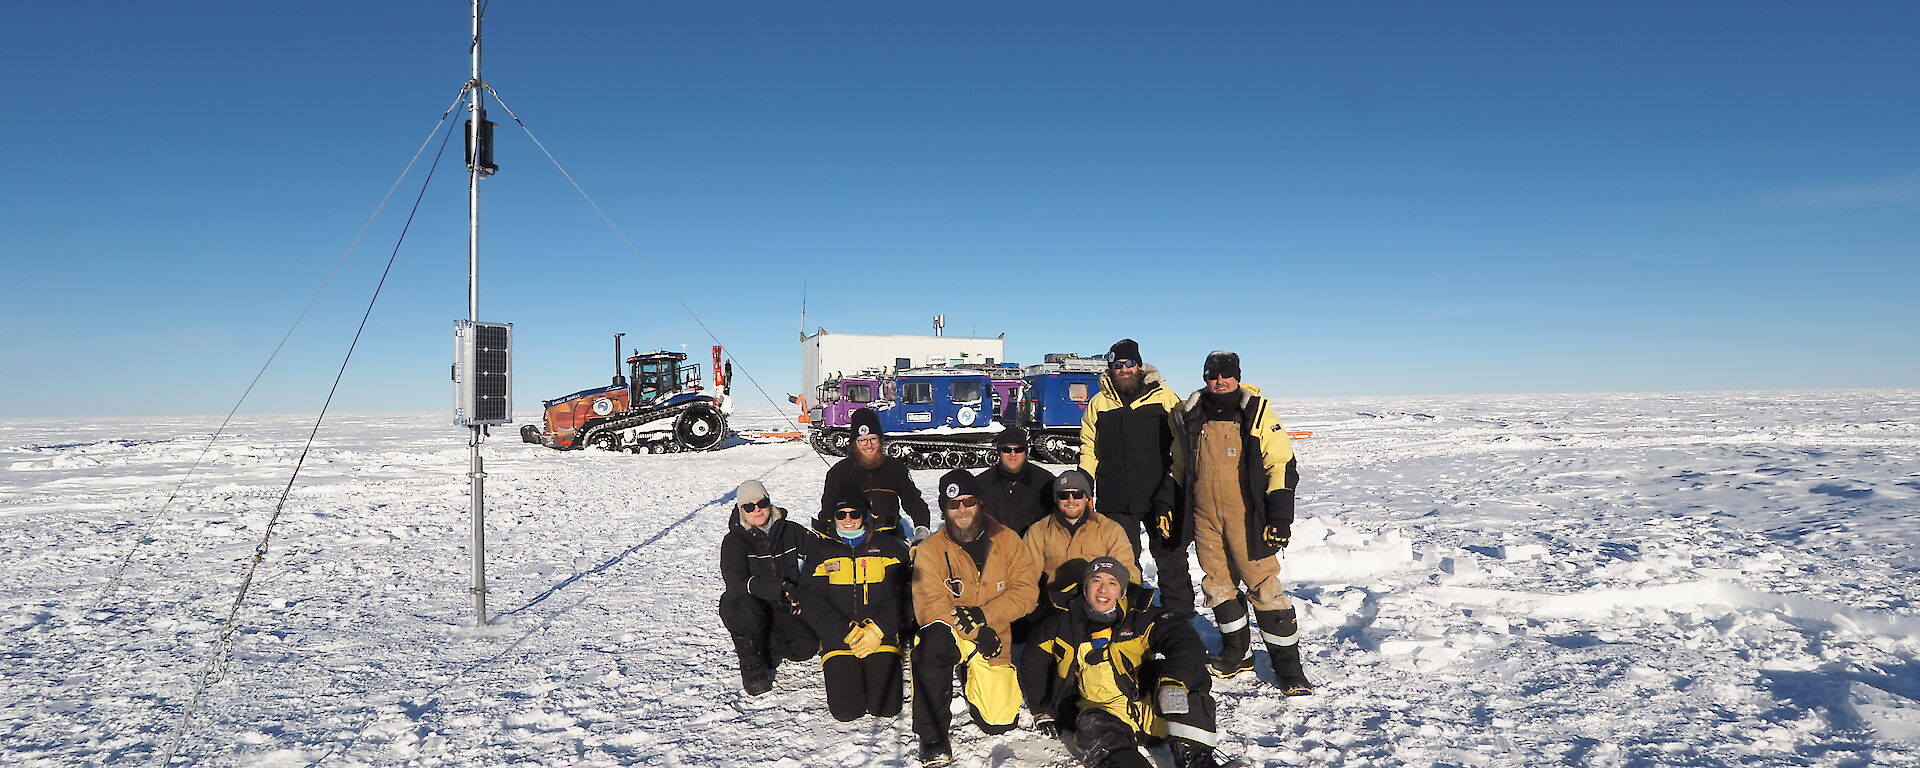 A group of expeditioners pose in an icy landscape with colourful vehicles in the distance.